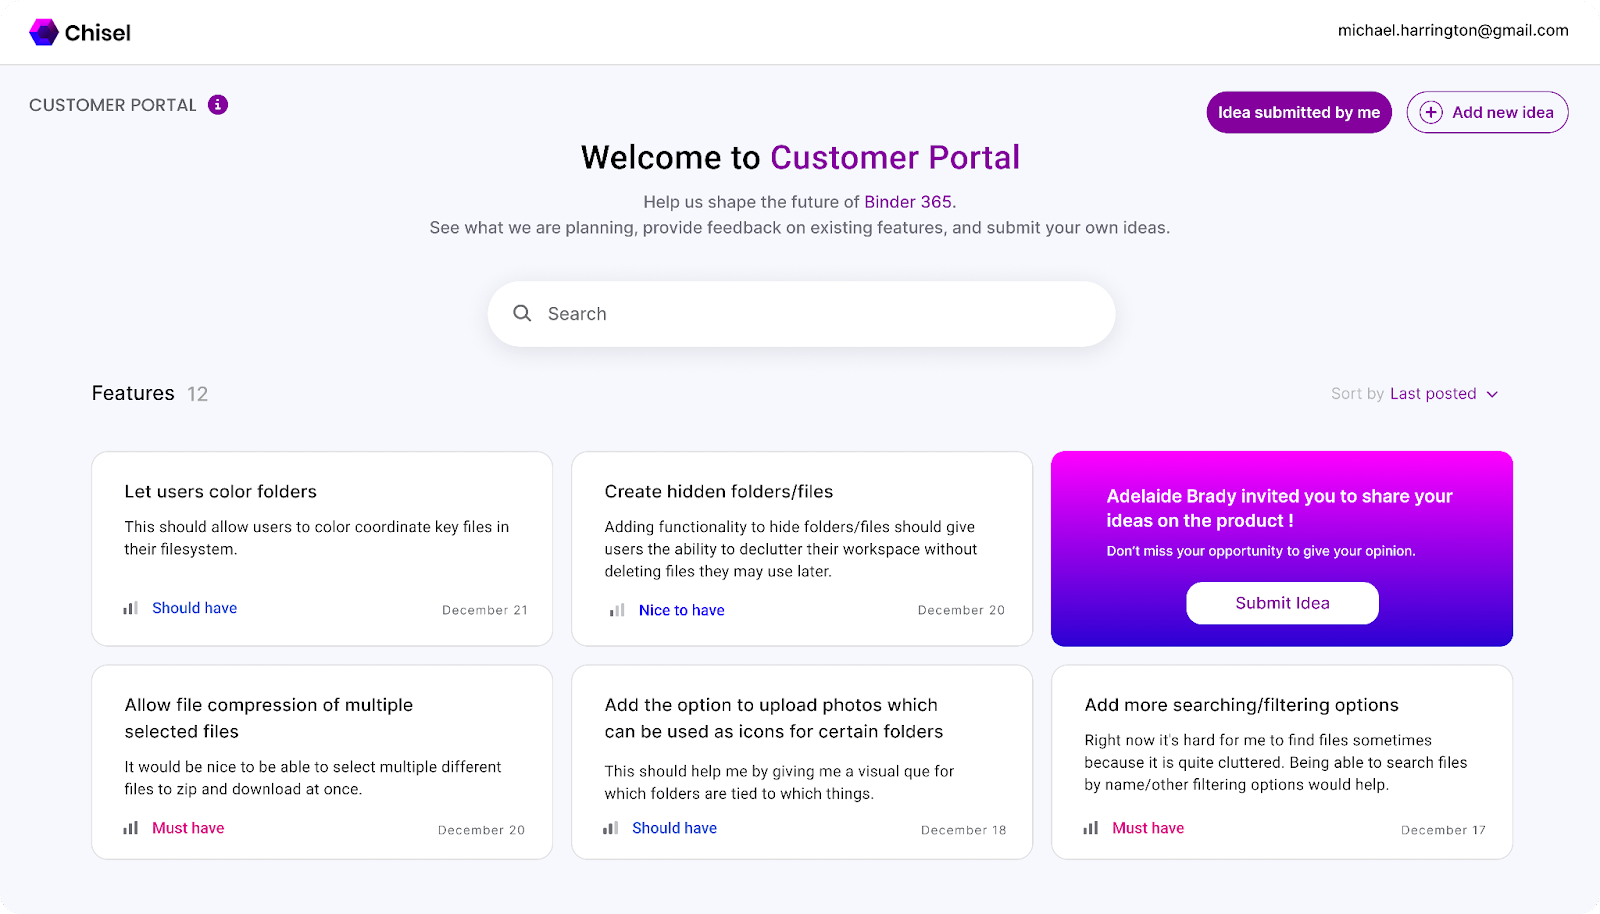 An image depicting the interface of Chisel’s Feedback Portal, showcasing the option for customers to share, store, and prioritize their ideas through a simple link.